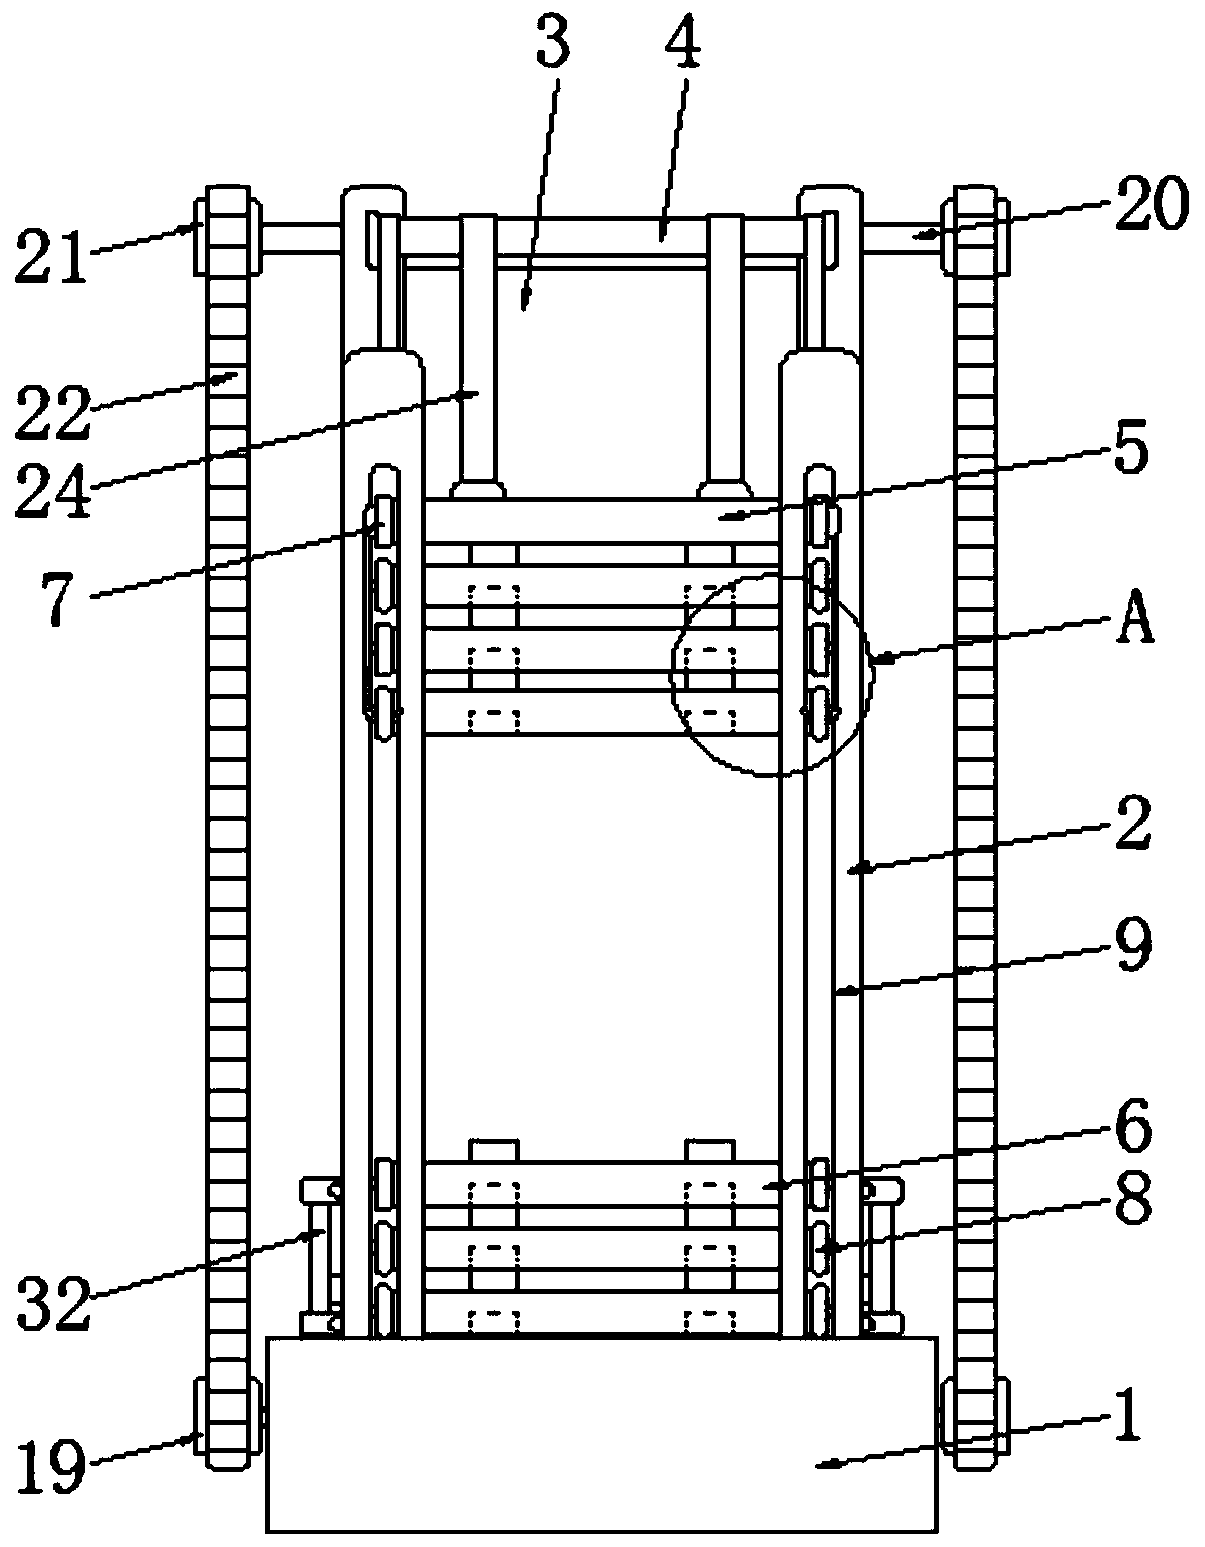 Variable counterweight ratio counterweight system used for elevator